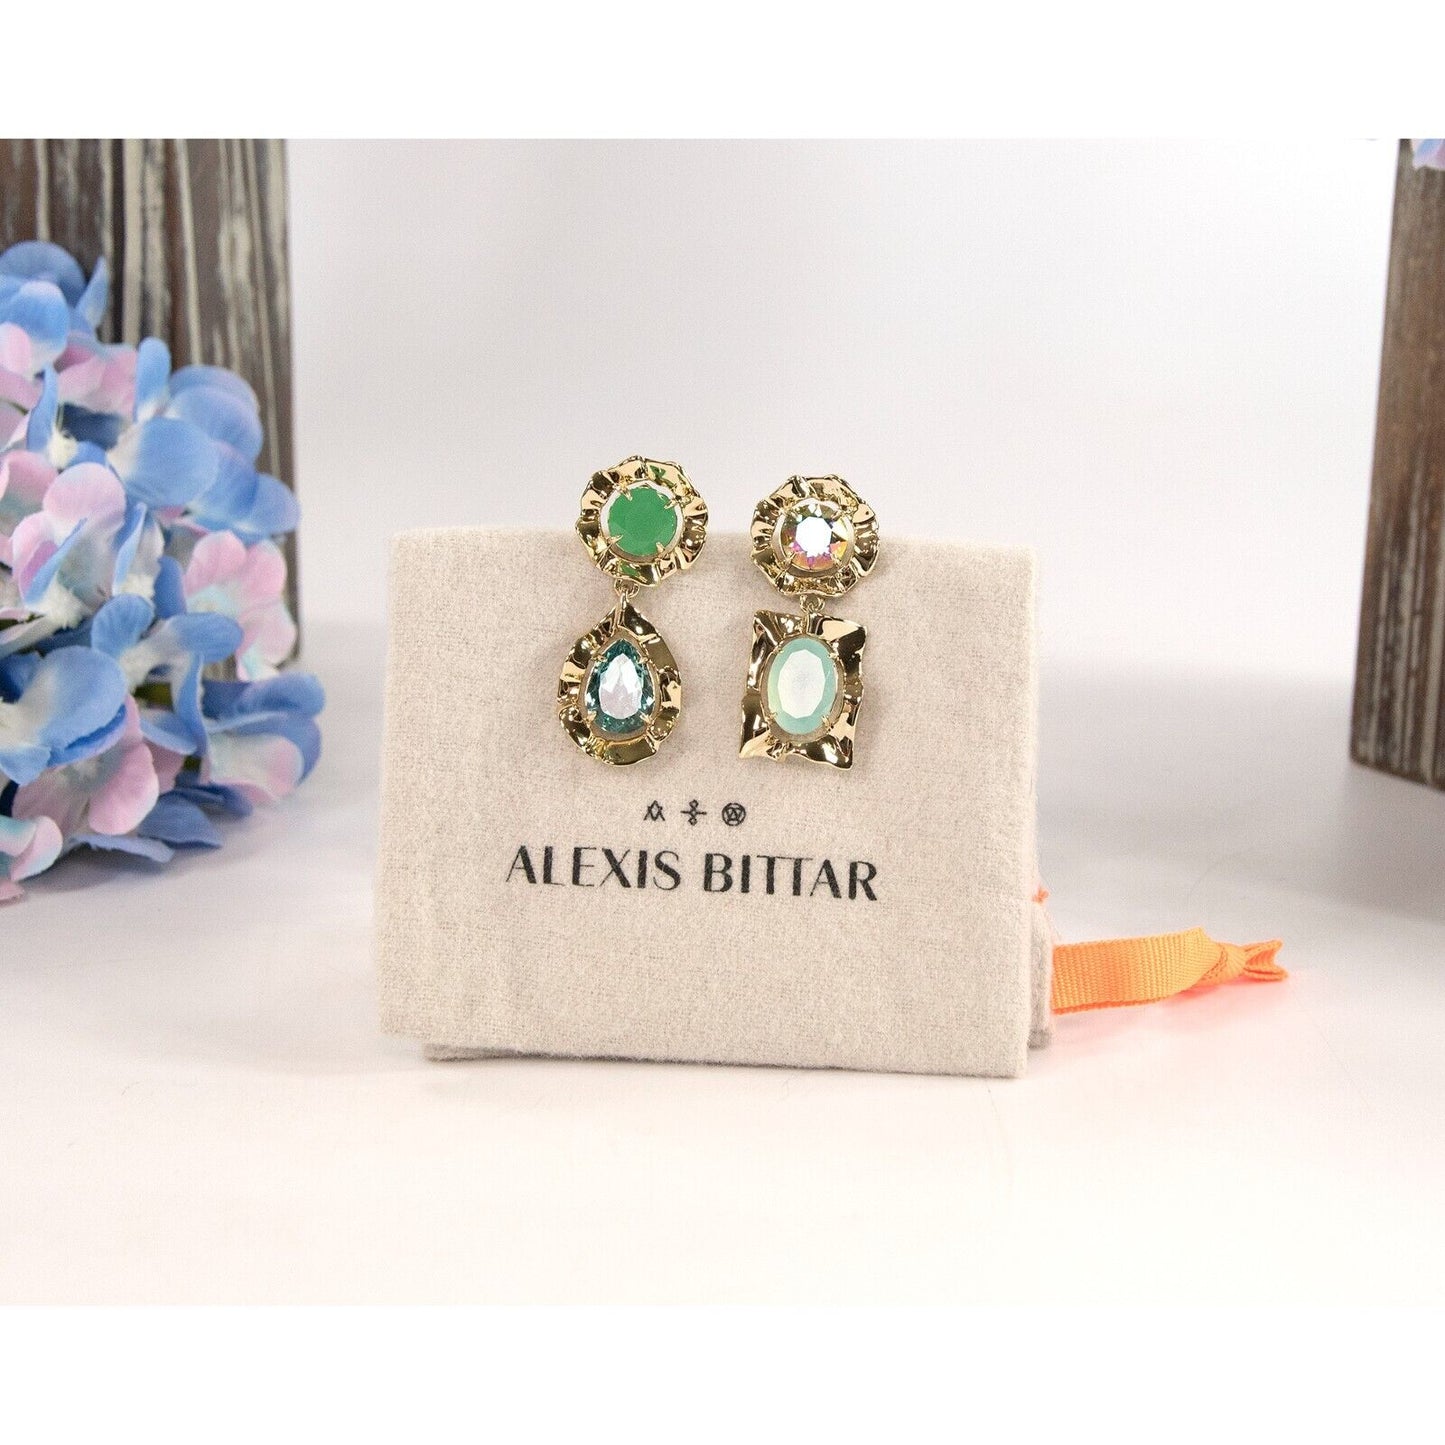 Alexis Bittar Crystal Ancient Coin Large Mismatched Drop Earrings NWT